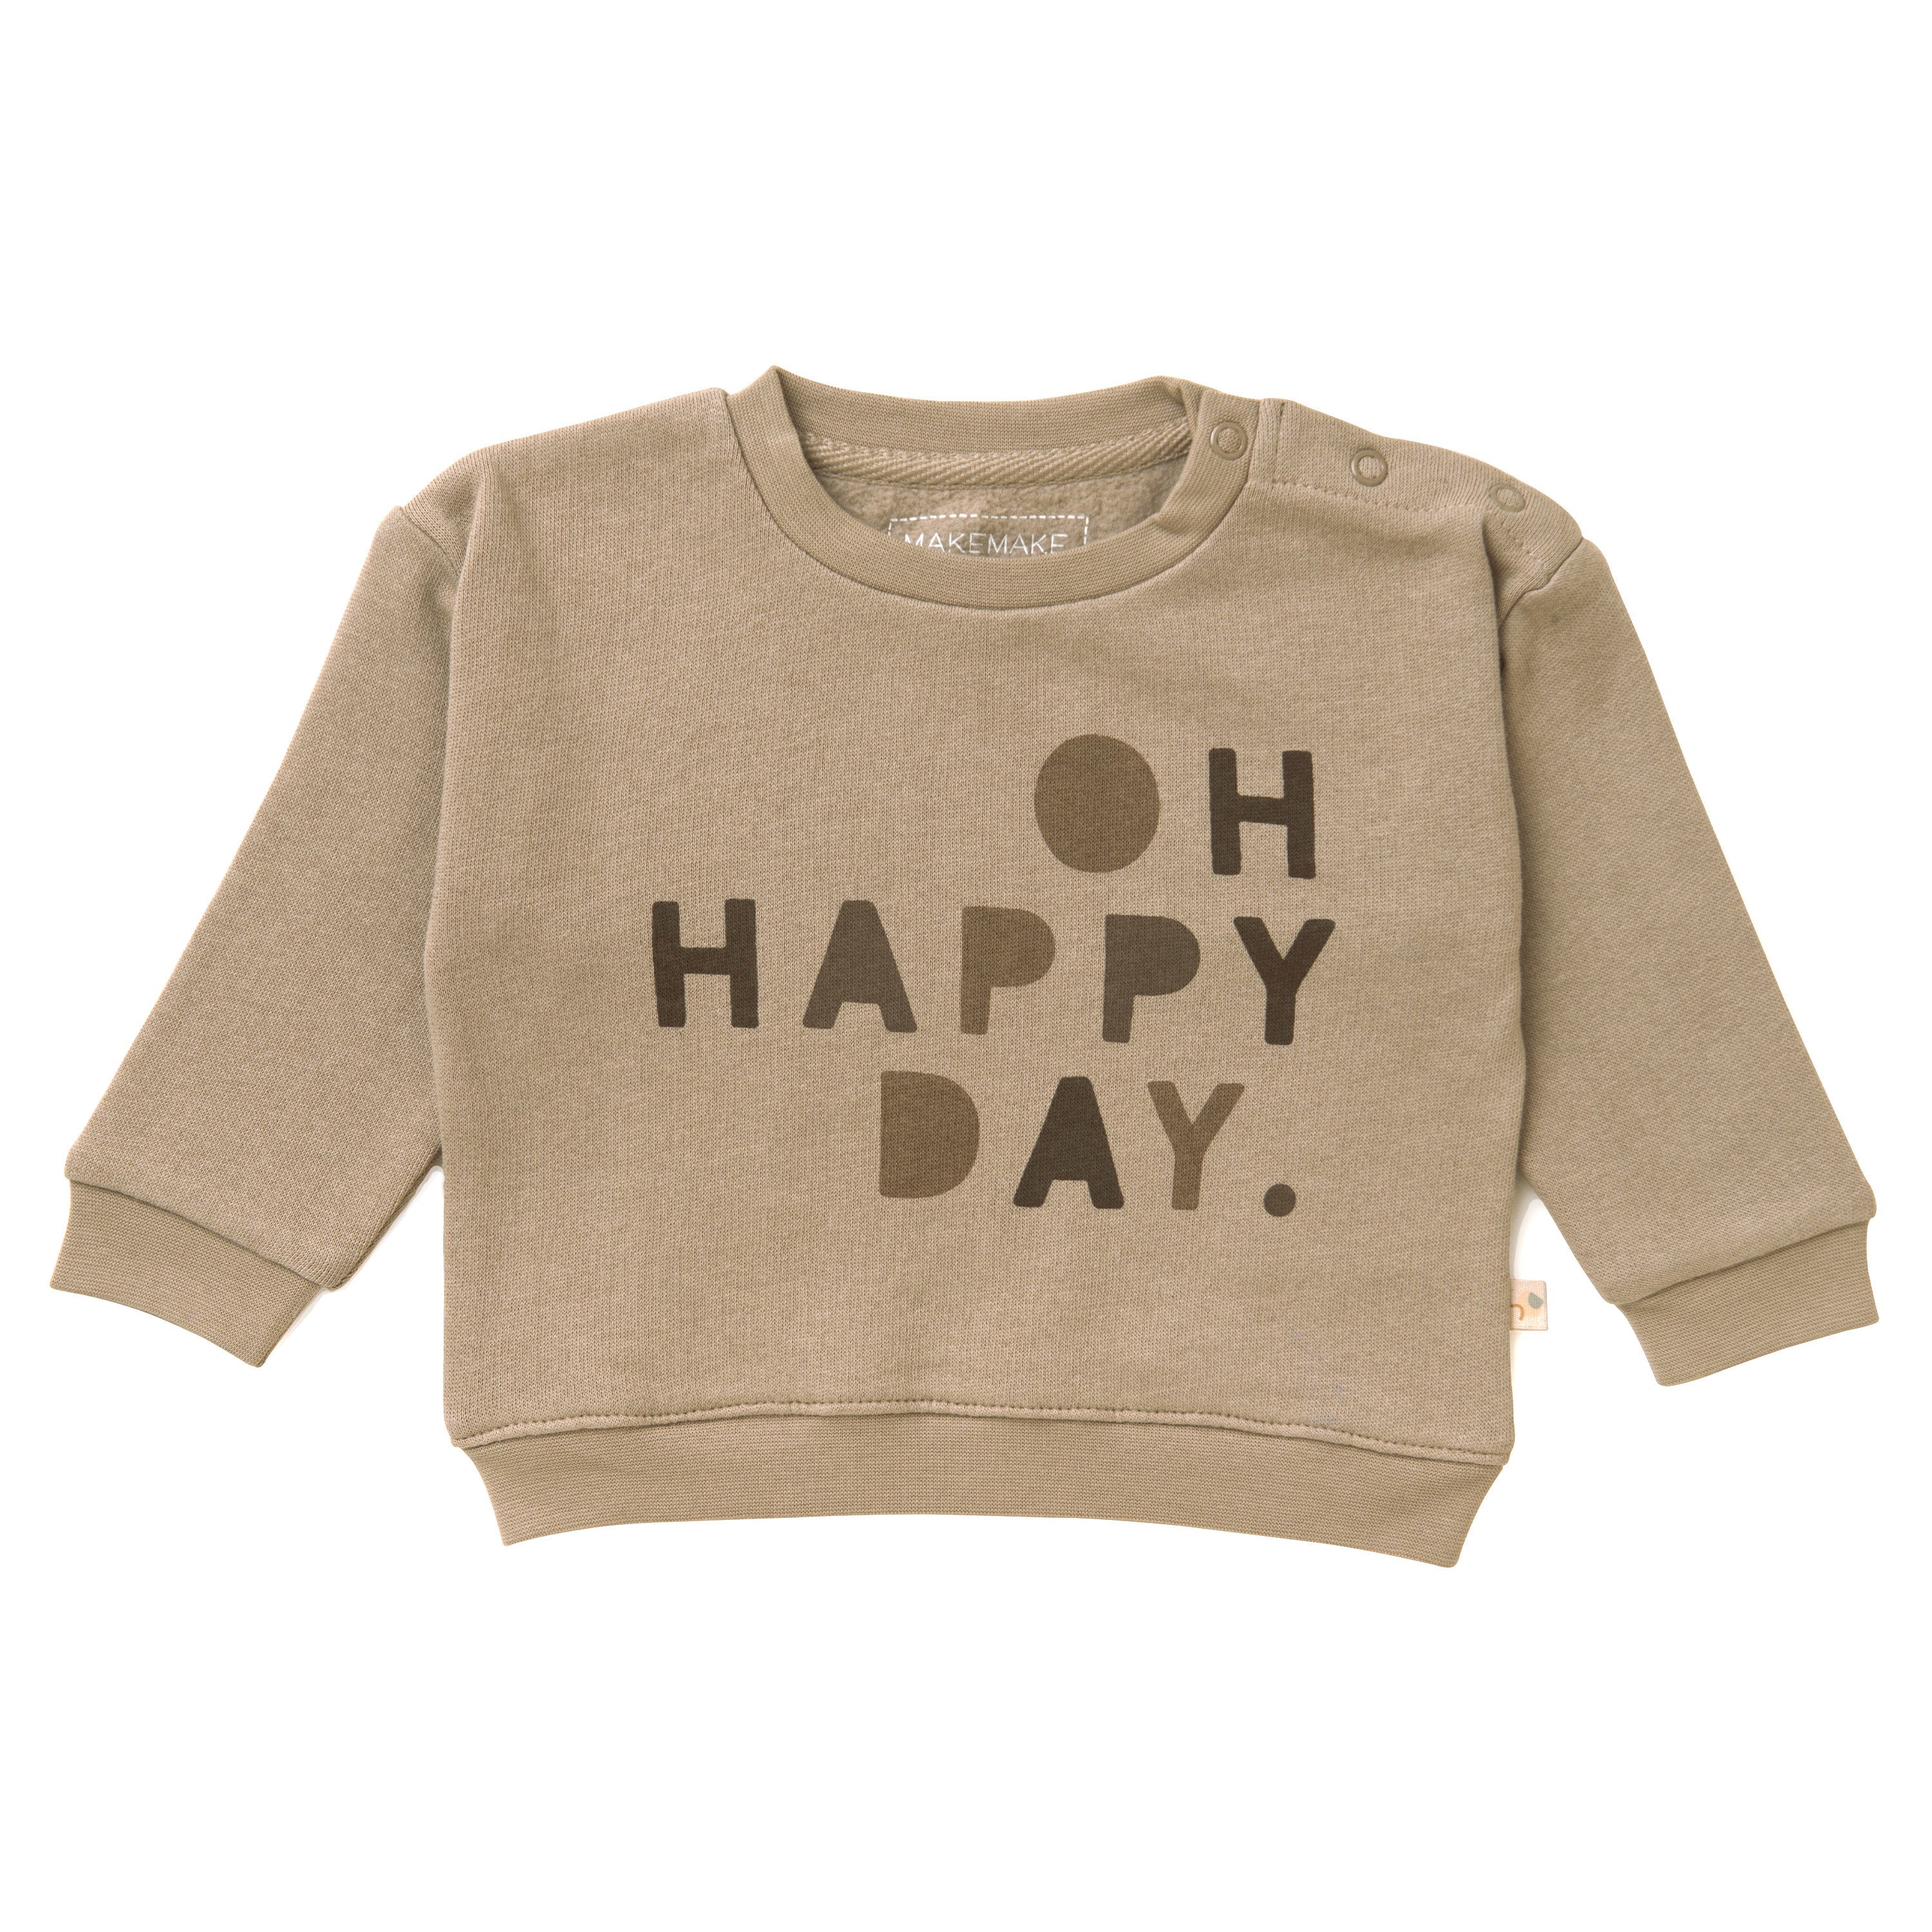 A beige Organic Baby sweatshirt from Makemake Organics with the phrase "oh happy day." in bold, dark letters across the chest, featuring a buttoned shoulder for easy dressing.